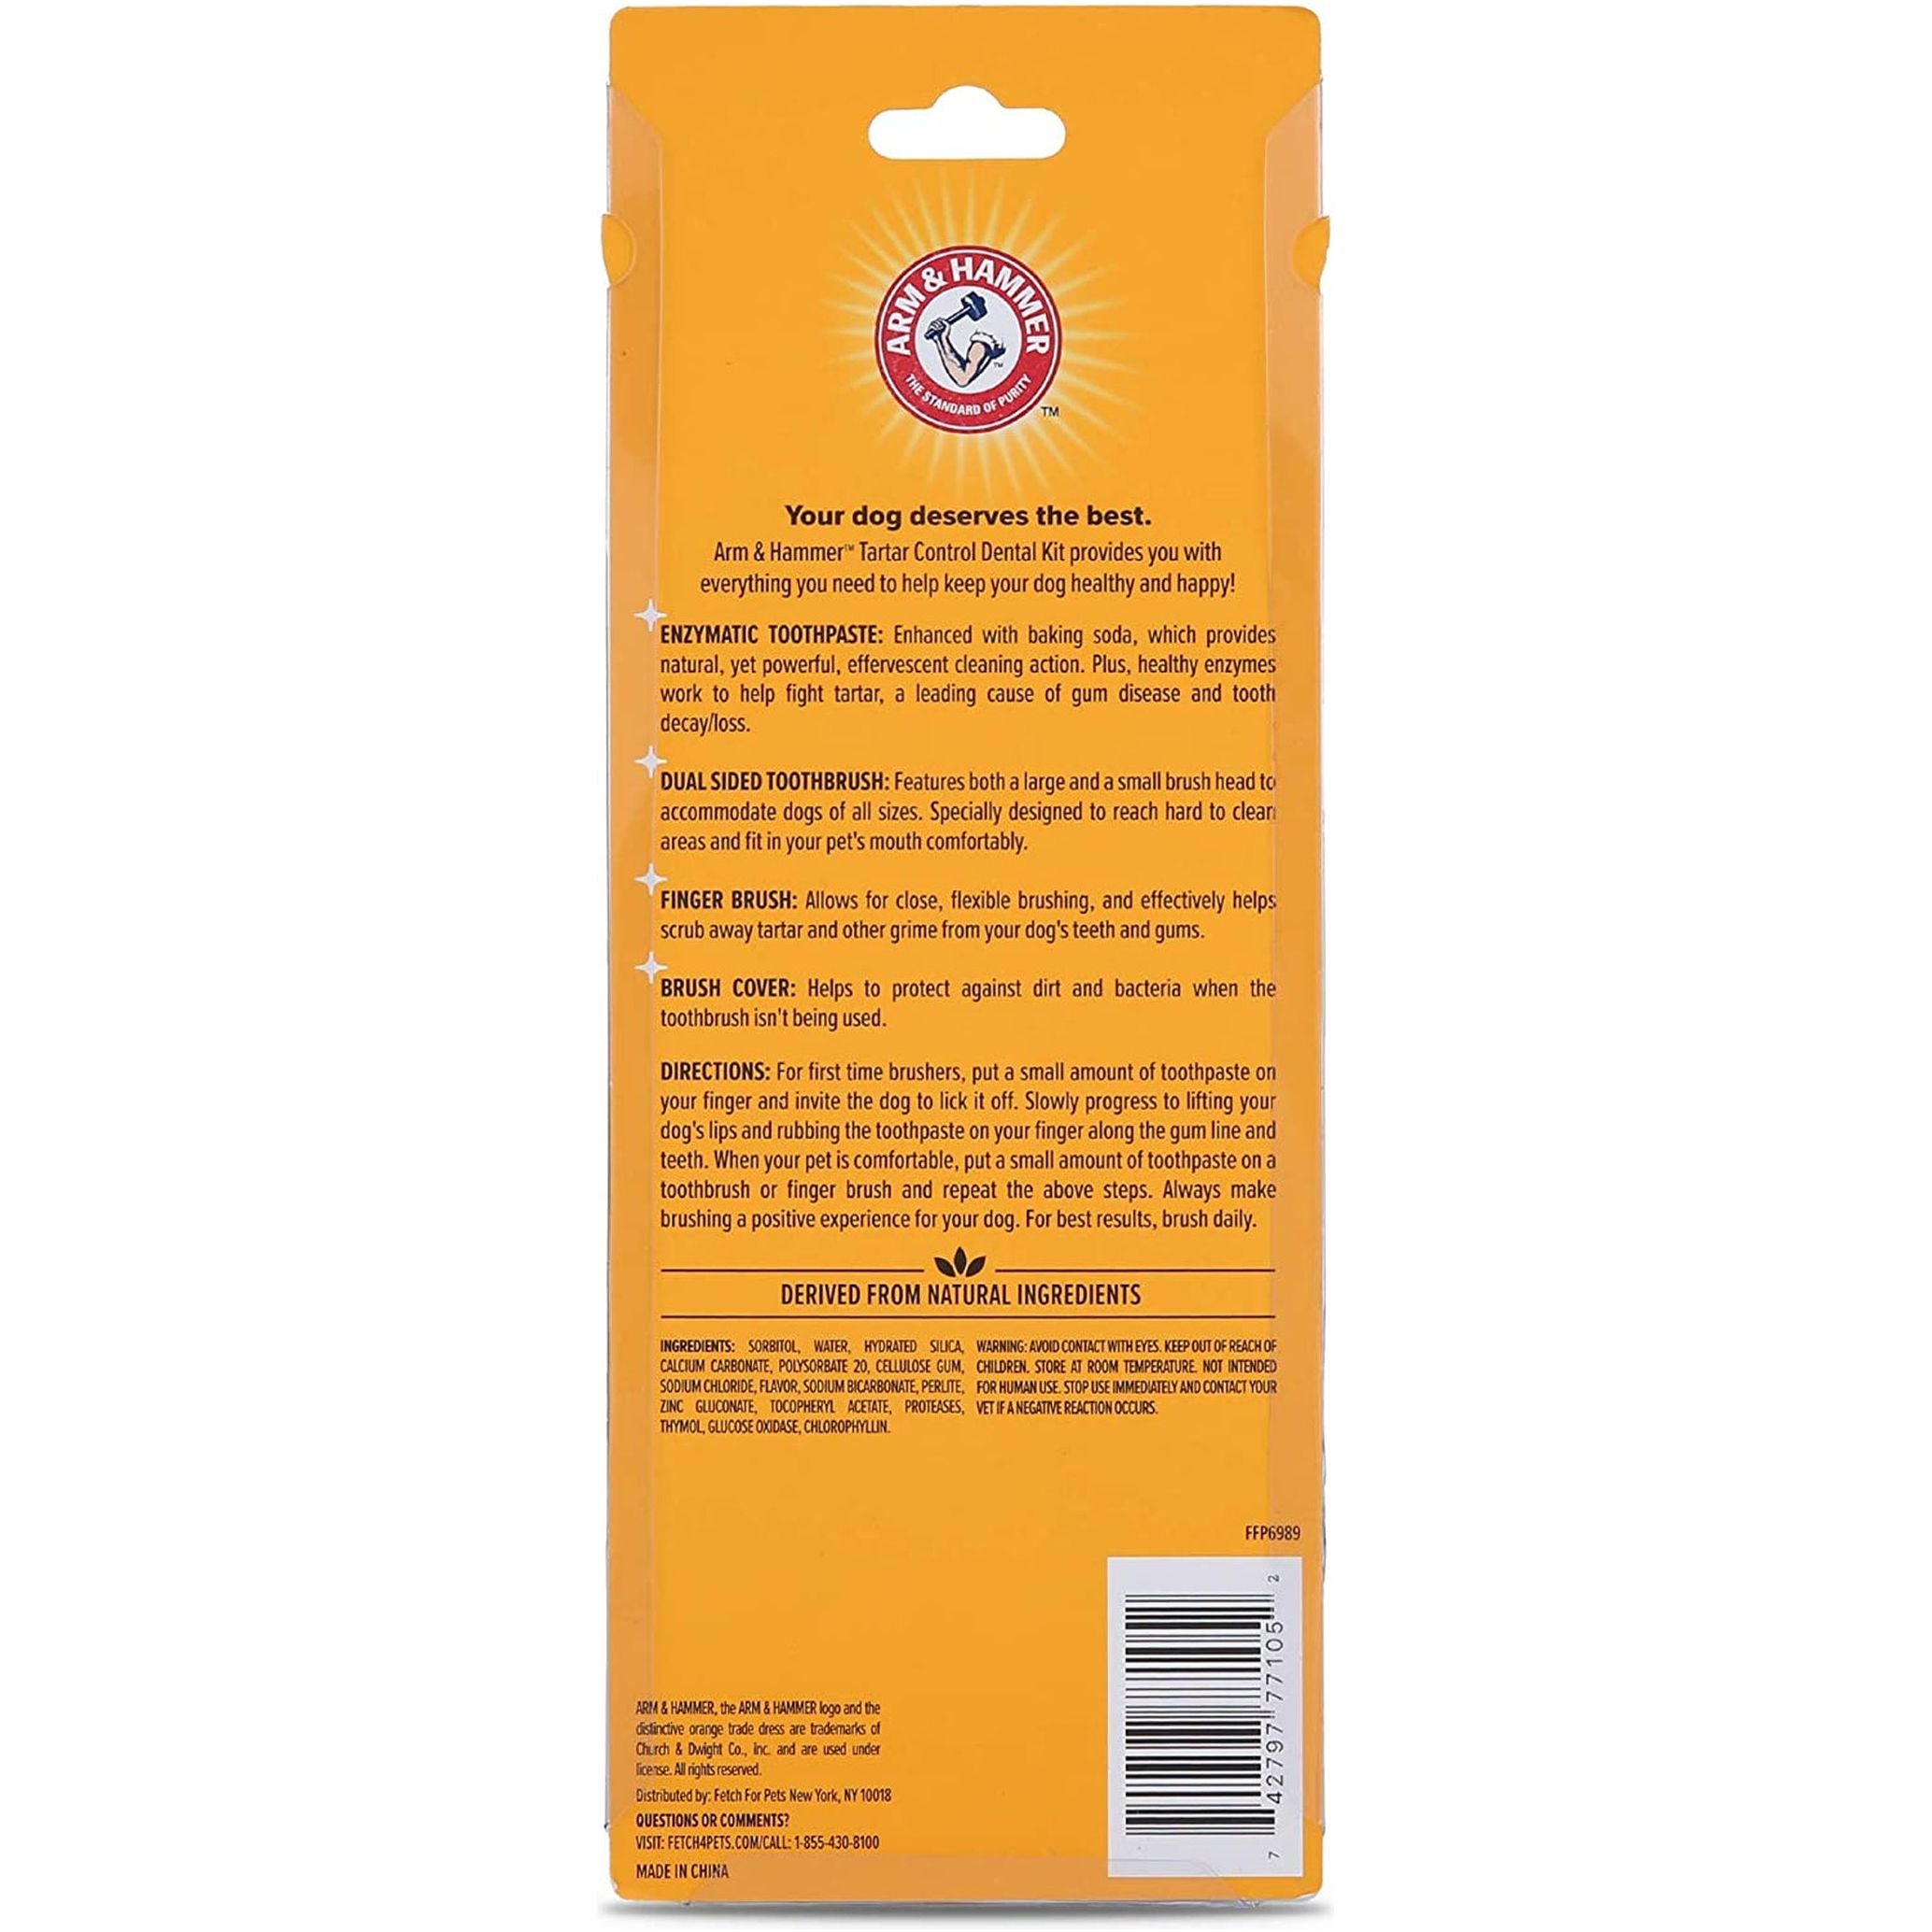 Arm & Hammer for Pets Tartar Control Kit for Dogs | Contains Toothpaste, Toothbrush & Fingerbrush | Reduces Plaque & Tartar Buildup, 3-Piece Kit, Banana Mint Flavor